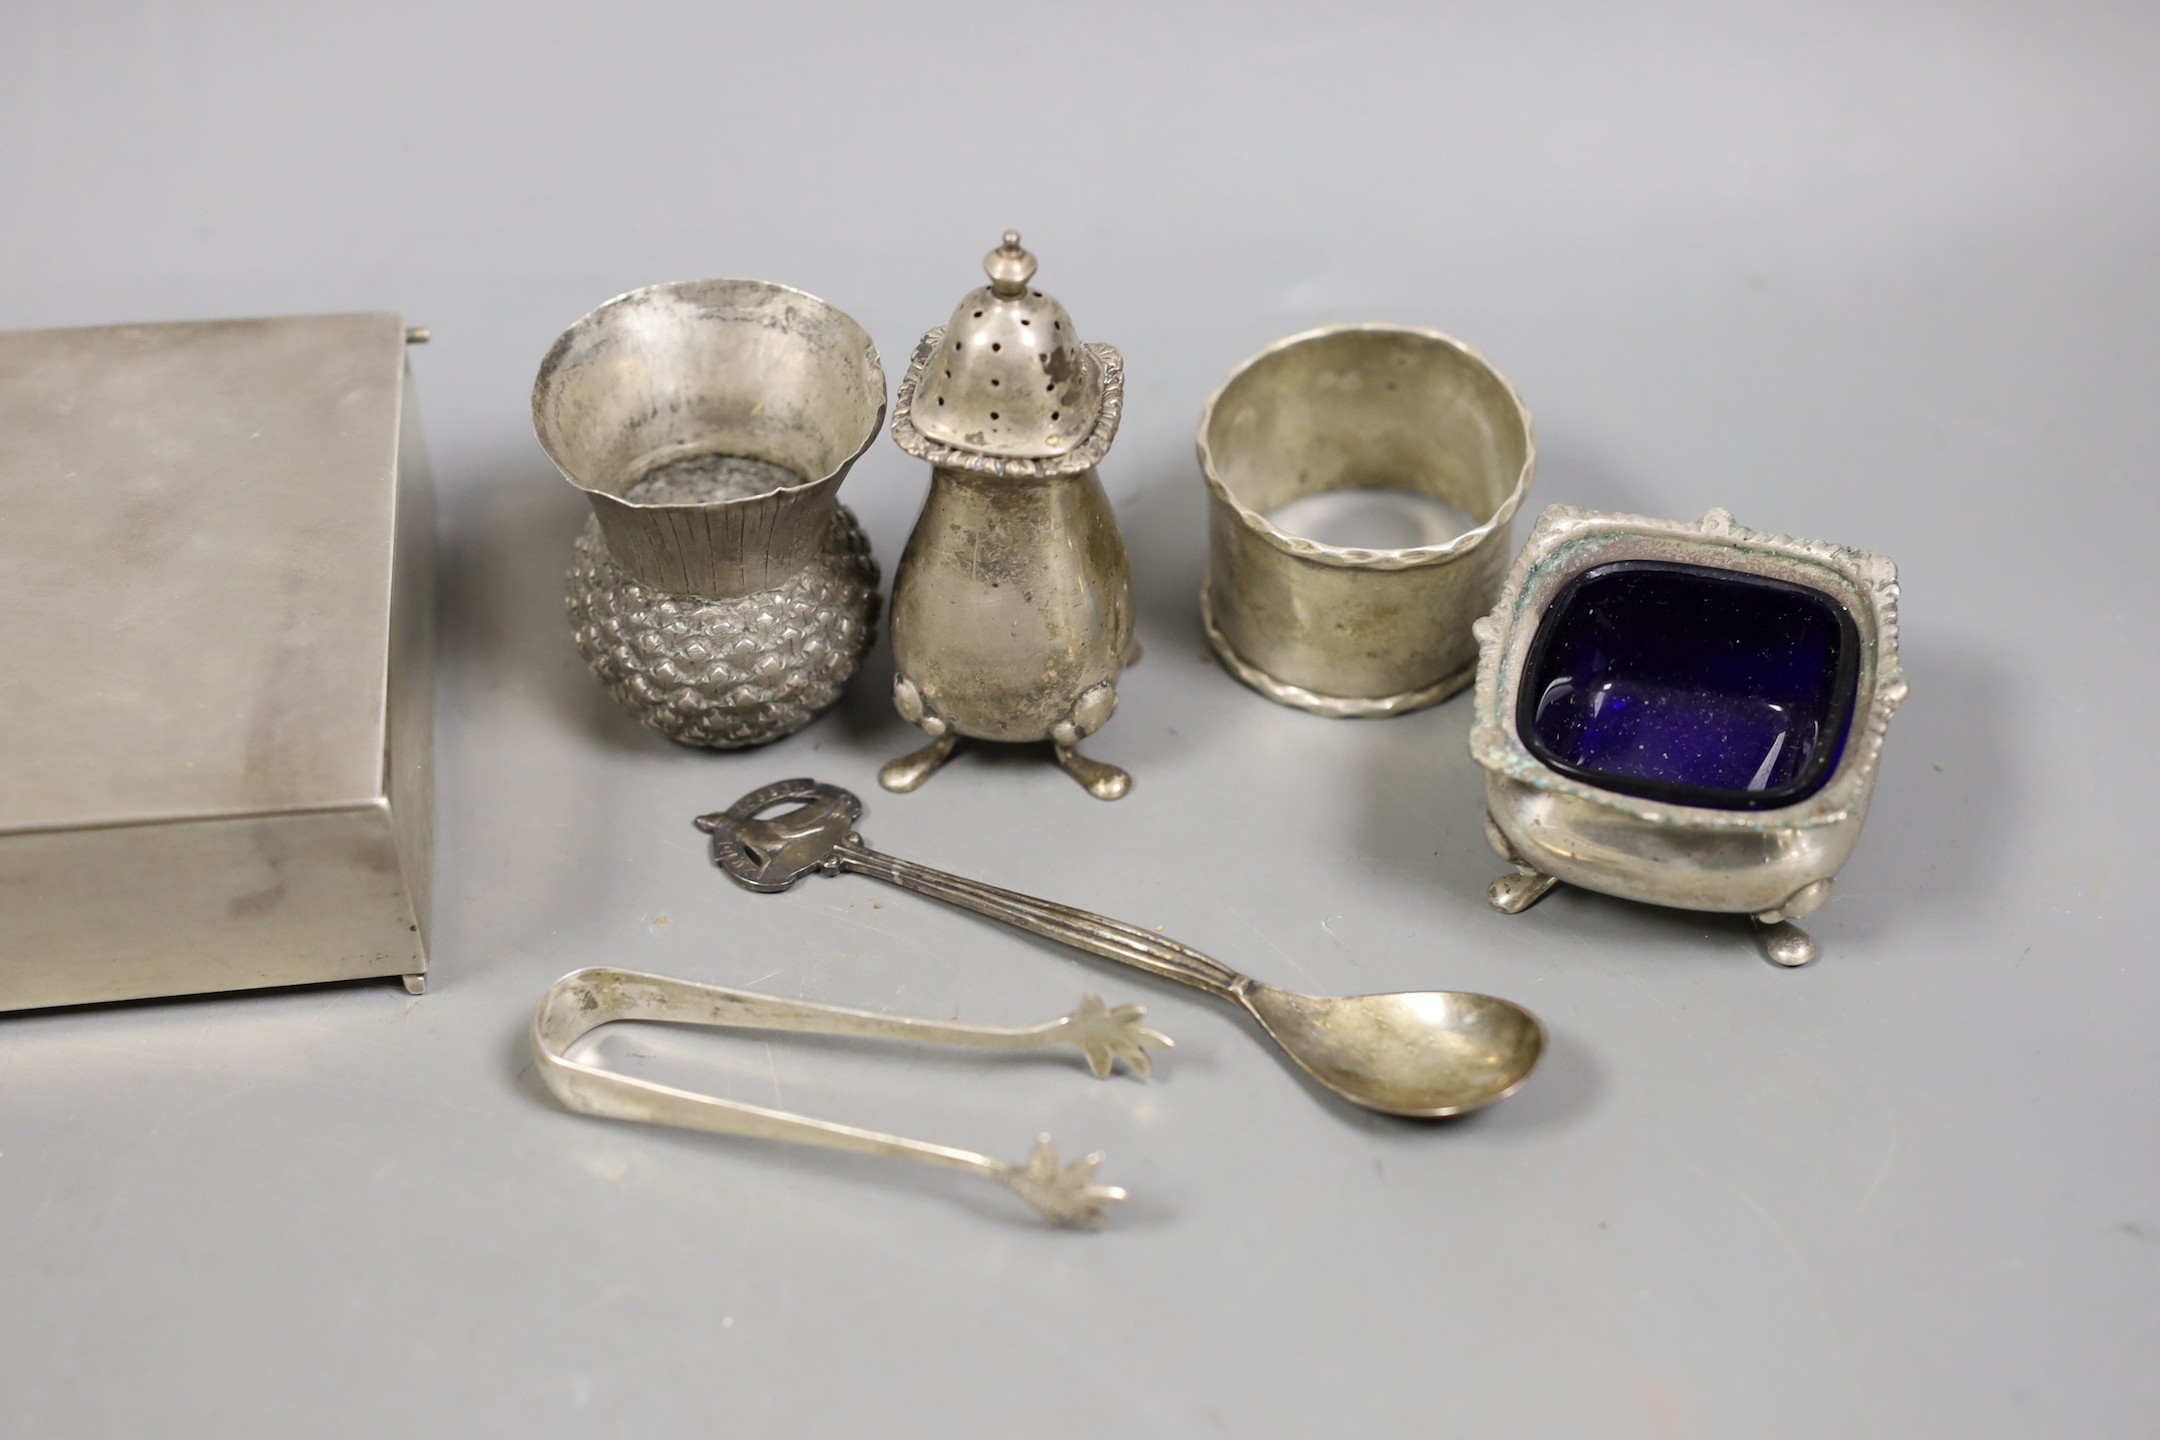 A George V silver mounted cigarette box, 11.5cm and other small sundry silver and plated items including napkin rings, condiments and small dish.